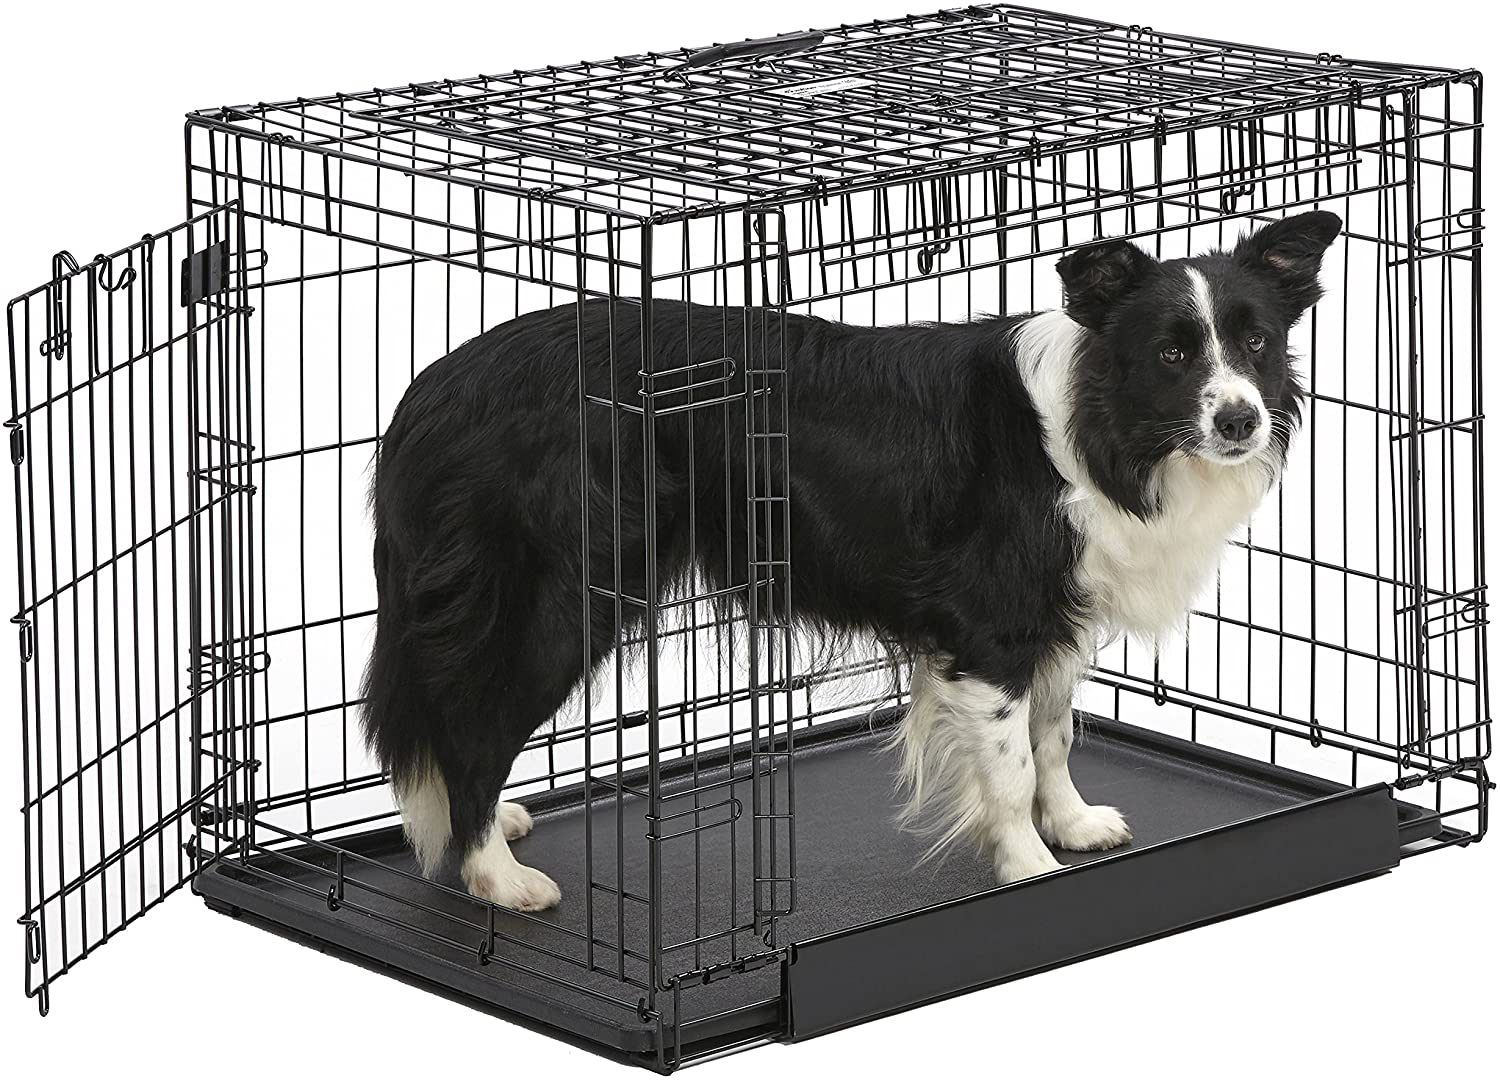 Ovation Folding Dog Crate | Dog Crate Features Space-Saving Overhead “Garage” Style Door & Comes Fully Equipped W/ Replacement Tray, Divider Panel & Floor Protecting Roller Feet Animals & Pet Supplies > Pet Supplies > Dog Supplies > Dog Kennels & Runs MidWest Homes for Pets Double Door 36-Inch w/Divider 